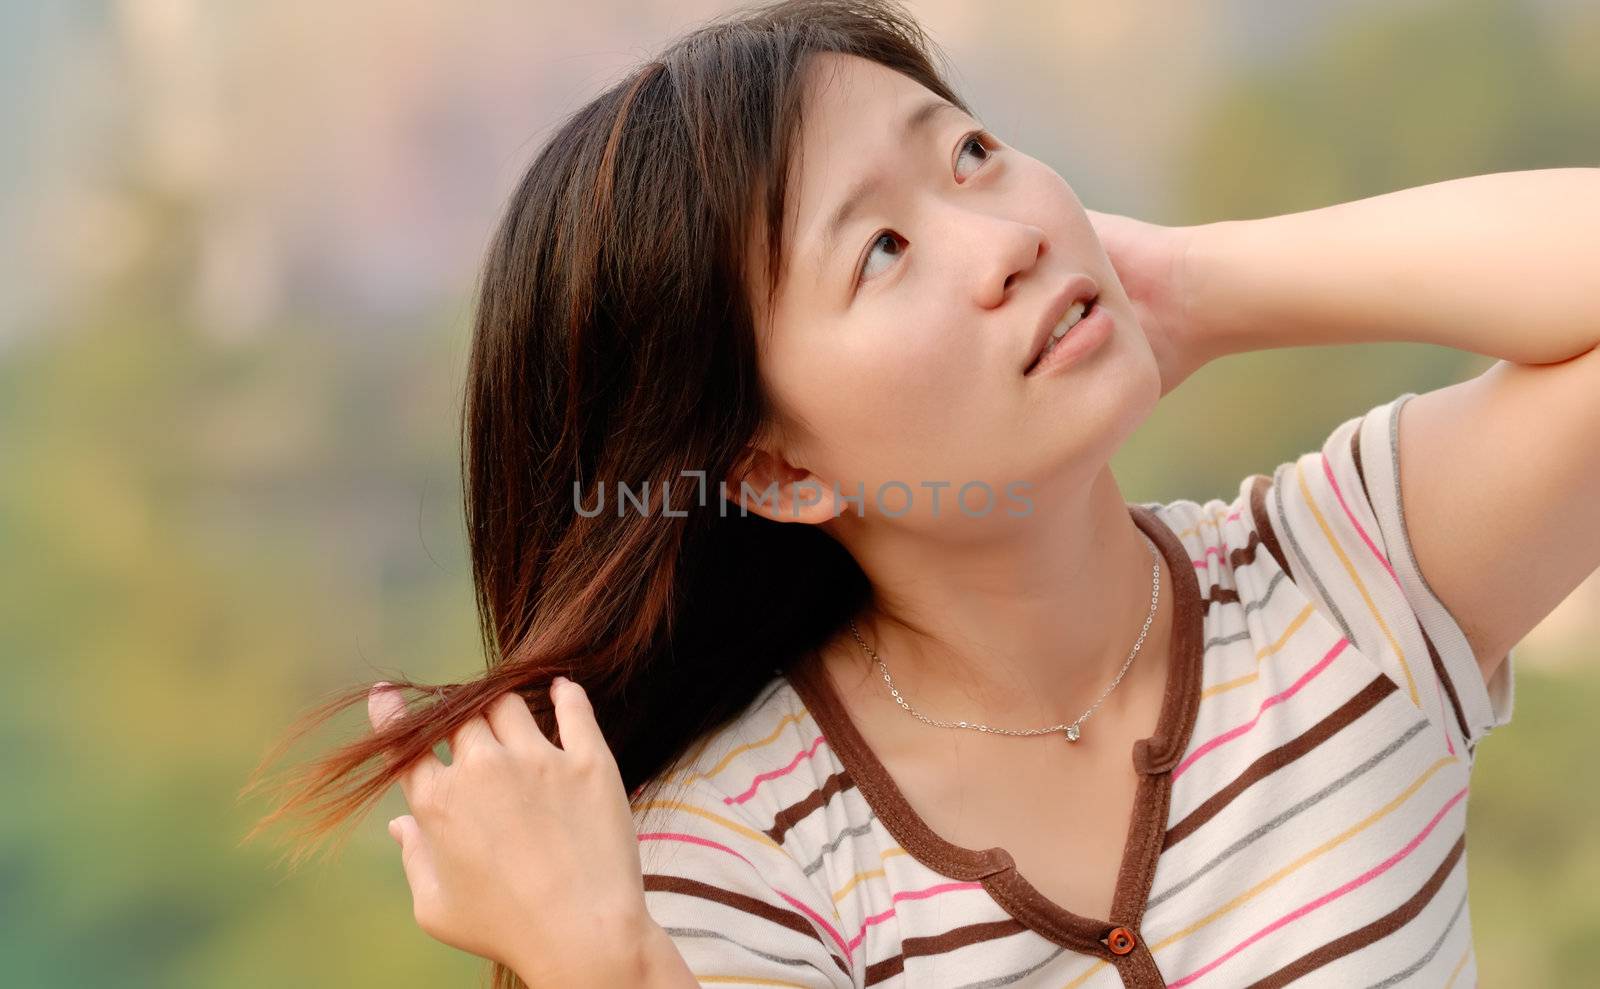 Here is an Asian beautiful girl in the outdoor.